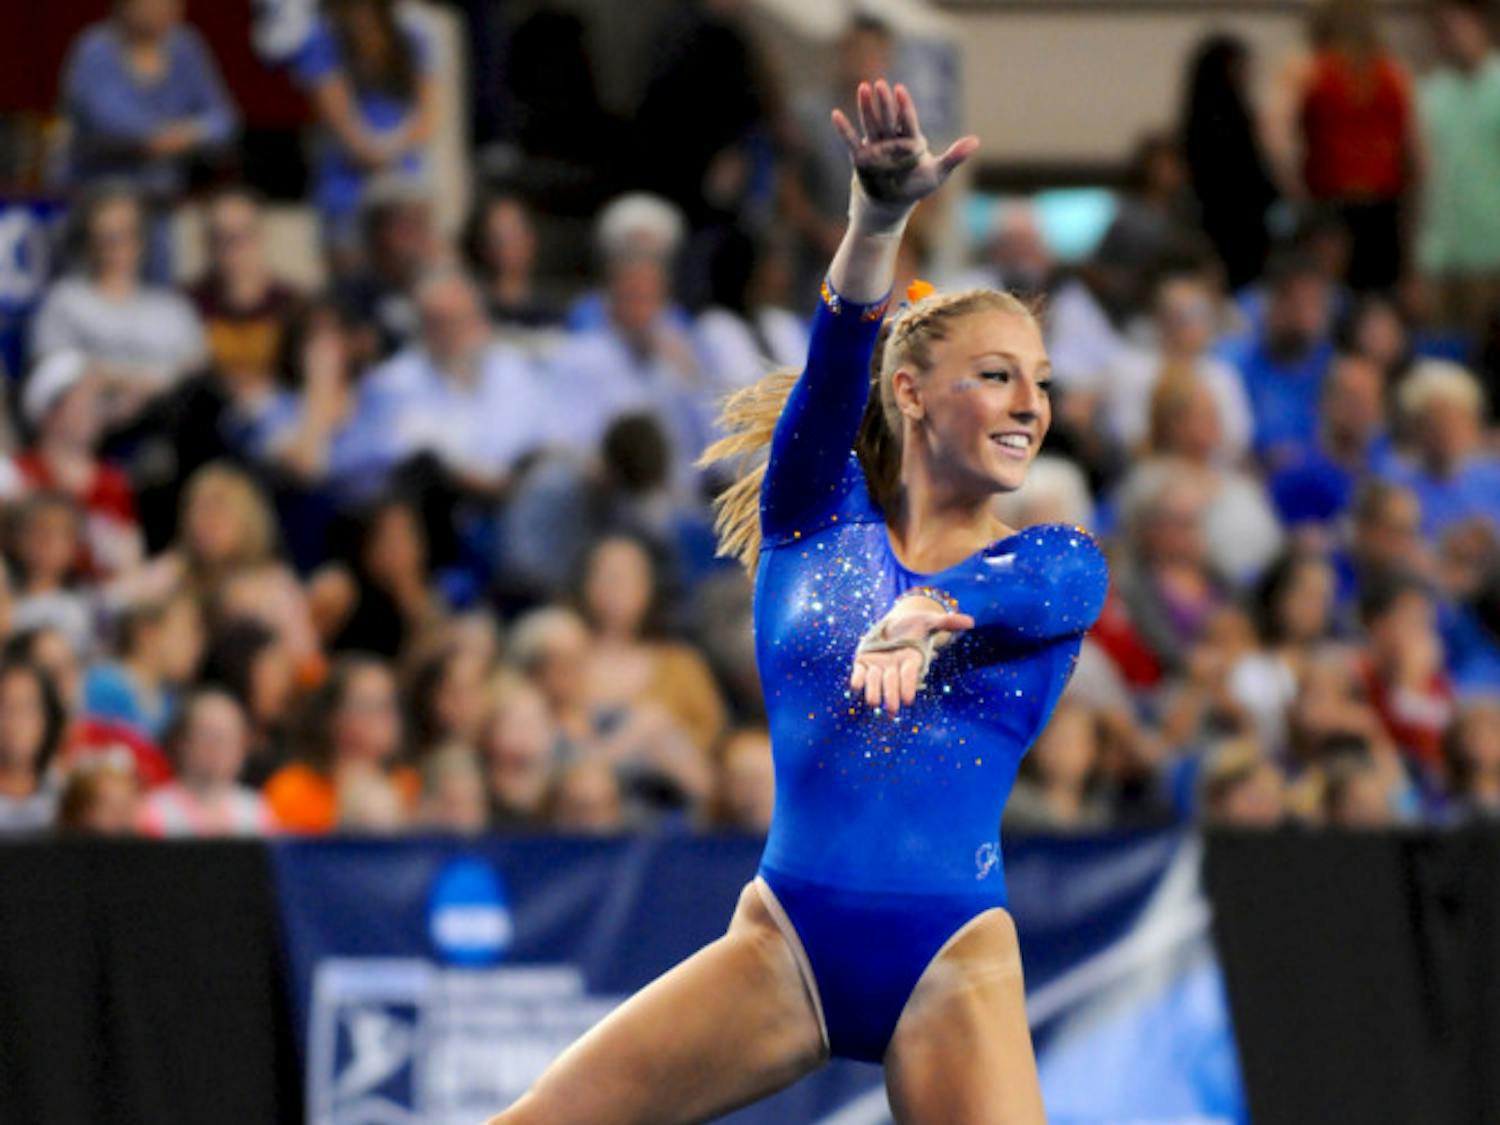 Alex McMurtry Gator Chomps during her floor exercise routine during the NCAA Gymnastics Super Six on April 16, 2016, in Fort Worth, Texas.